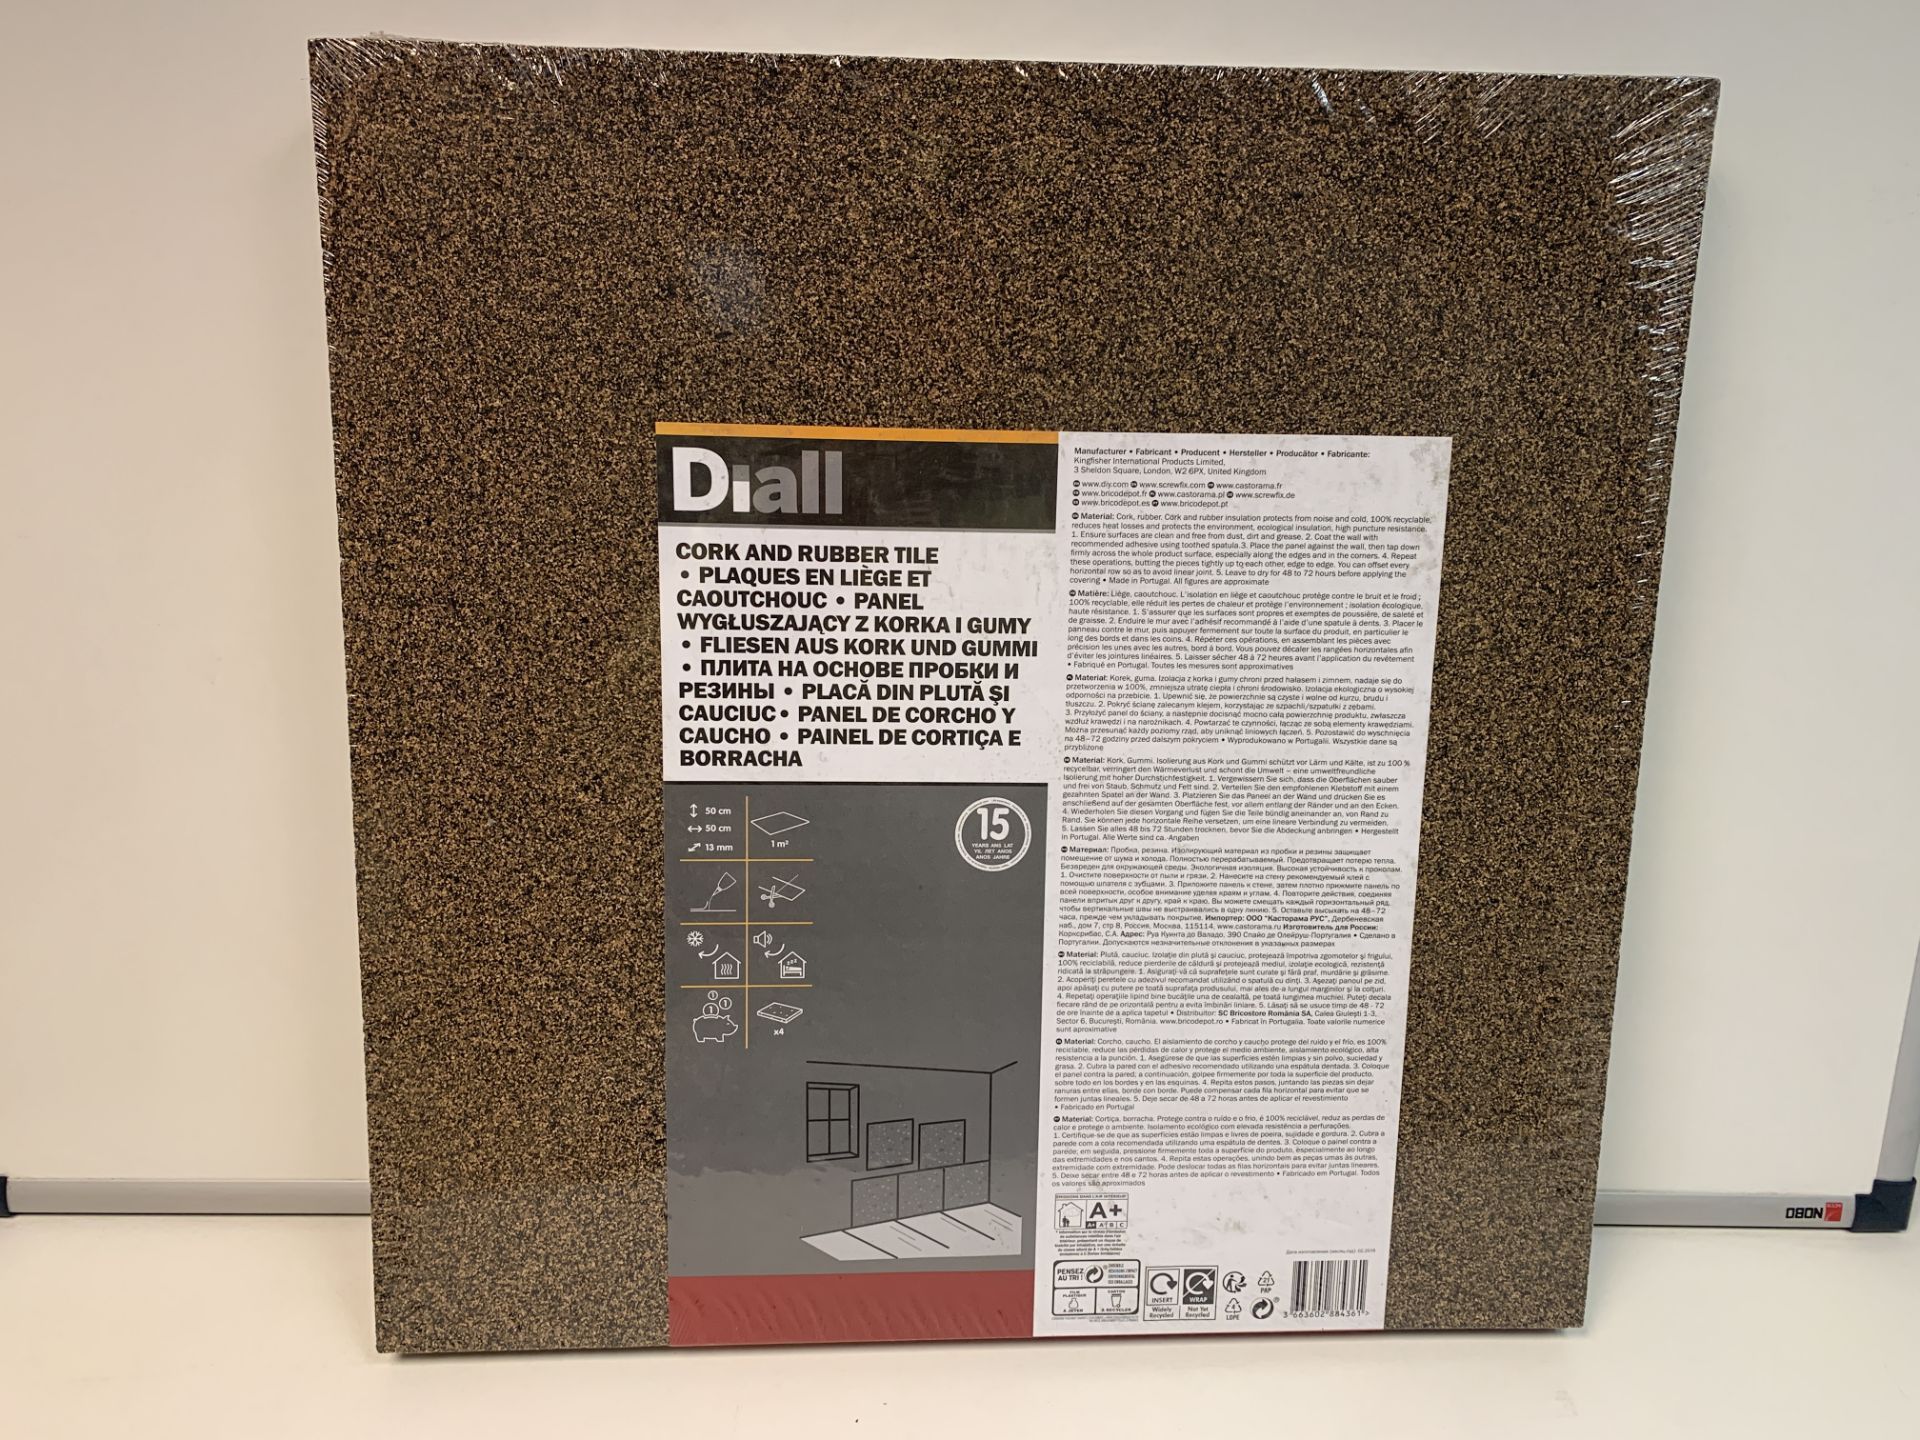 6 X NEW PACKAGES PACKS OF 4 DIALL CORK & RUBBEE TILES FOR INSULATION PROTECTION FROM NOISE AND COLD.